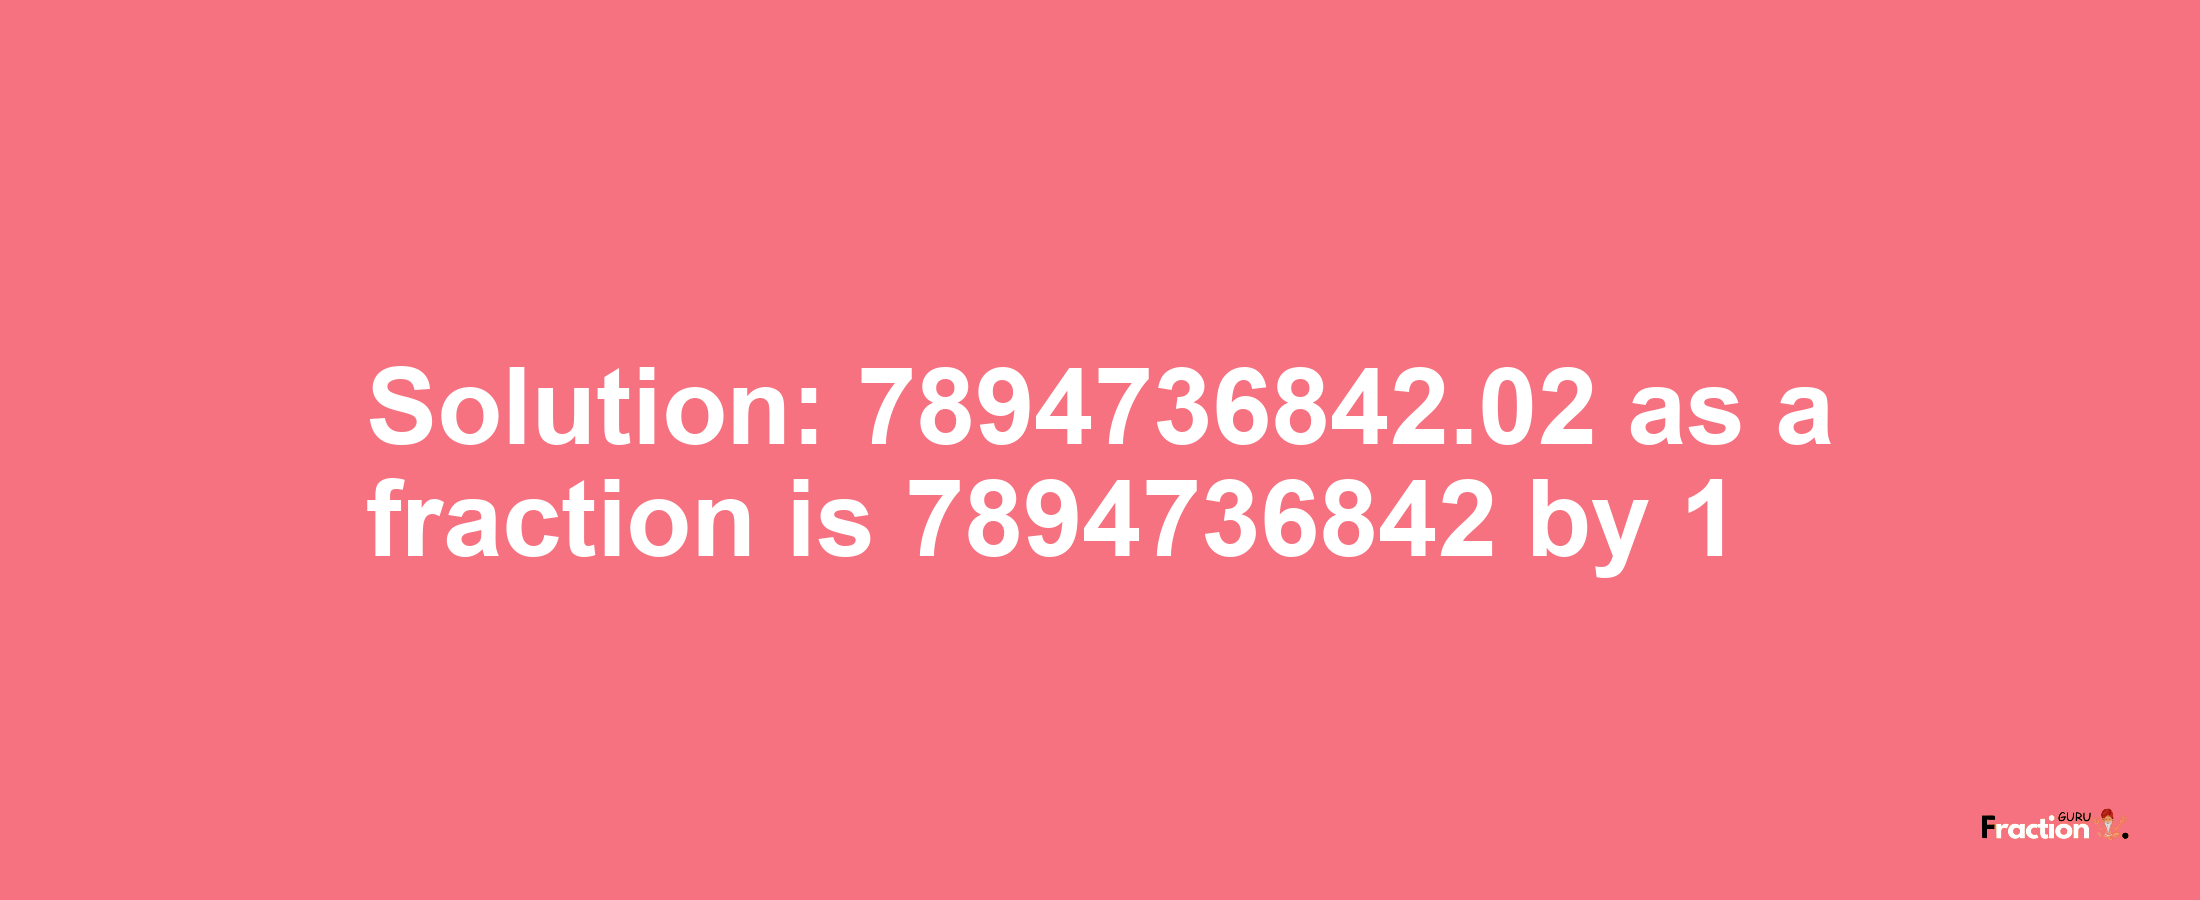 Solution:7894736842.02 as a fraction is 7894736842/1